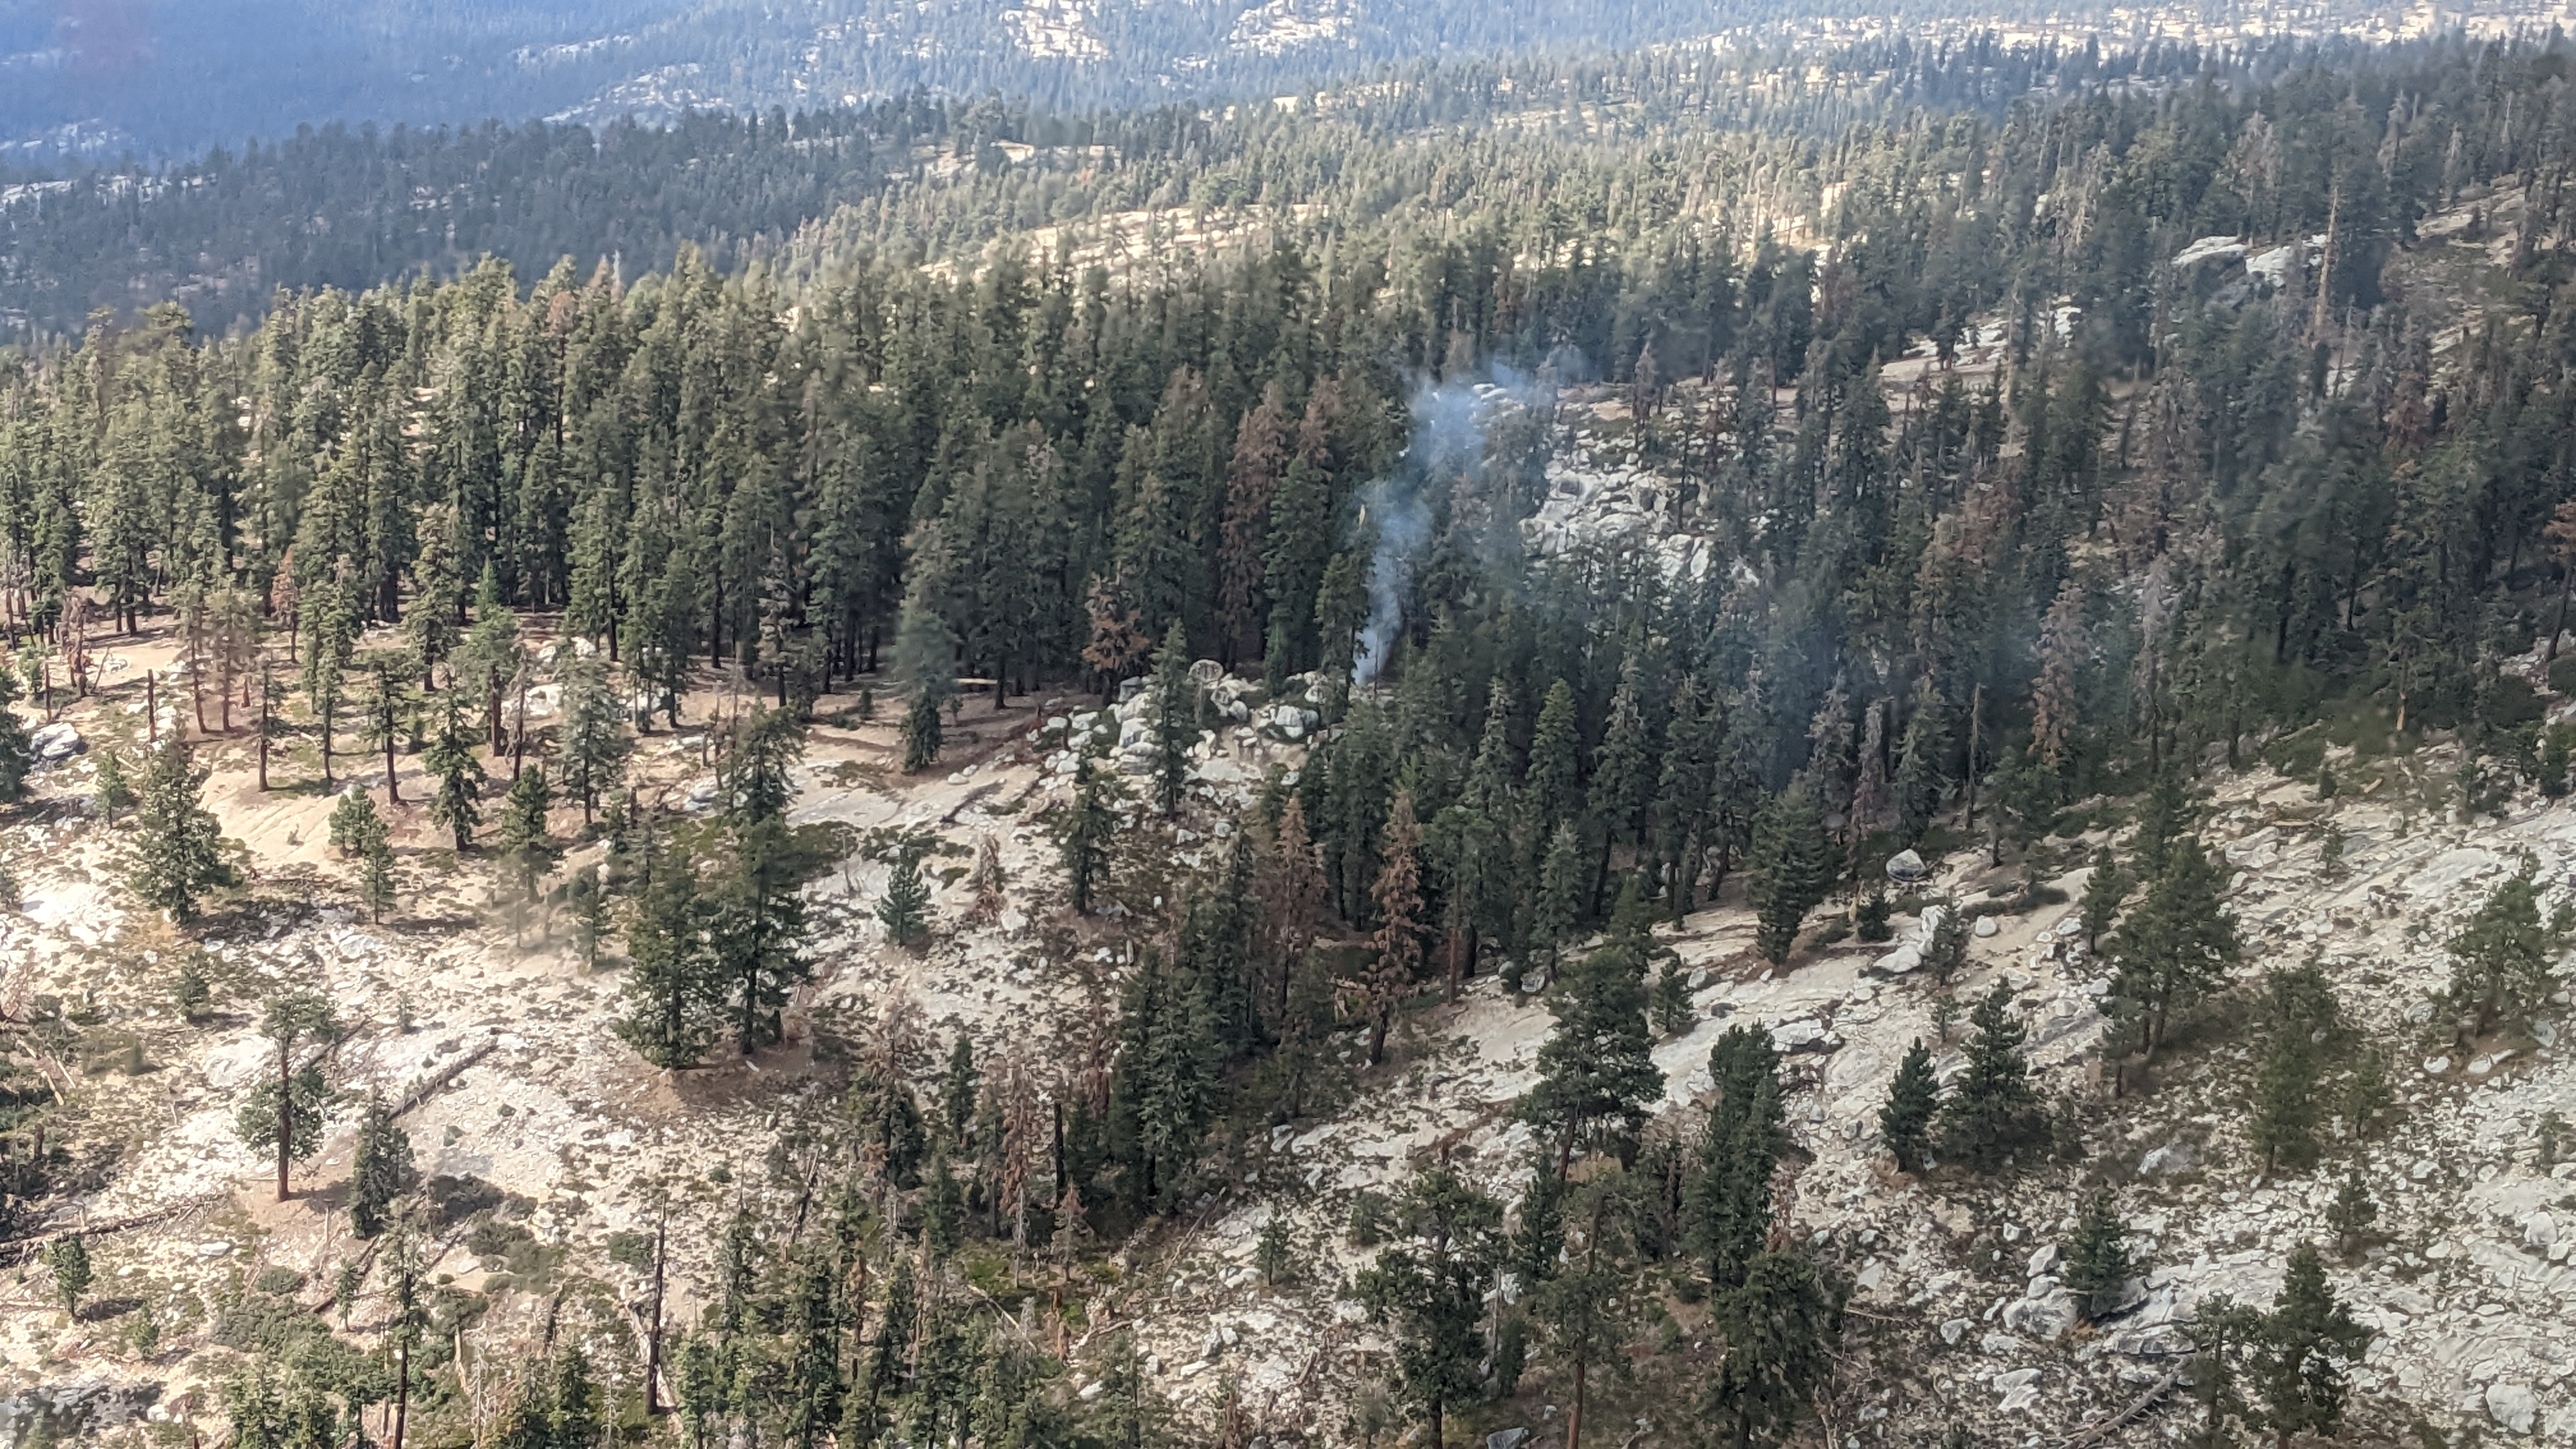 A small plume of gray smoke rises from a tree on a sparsely forested hillside